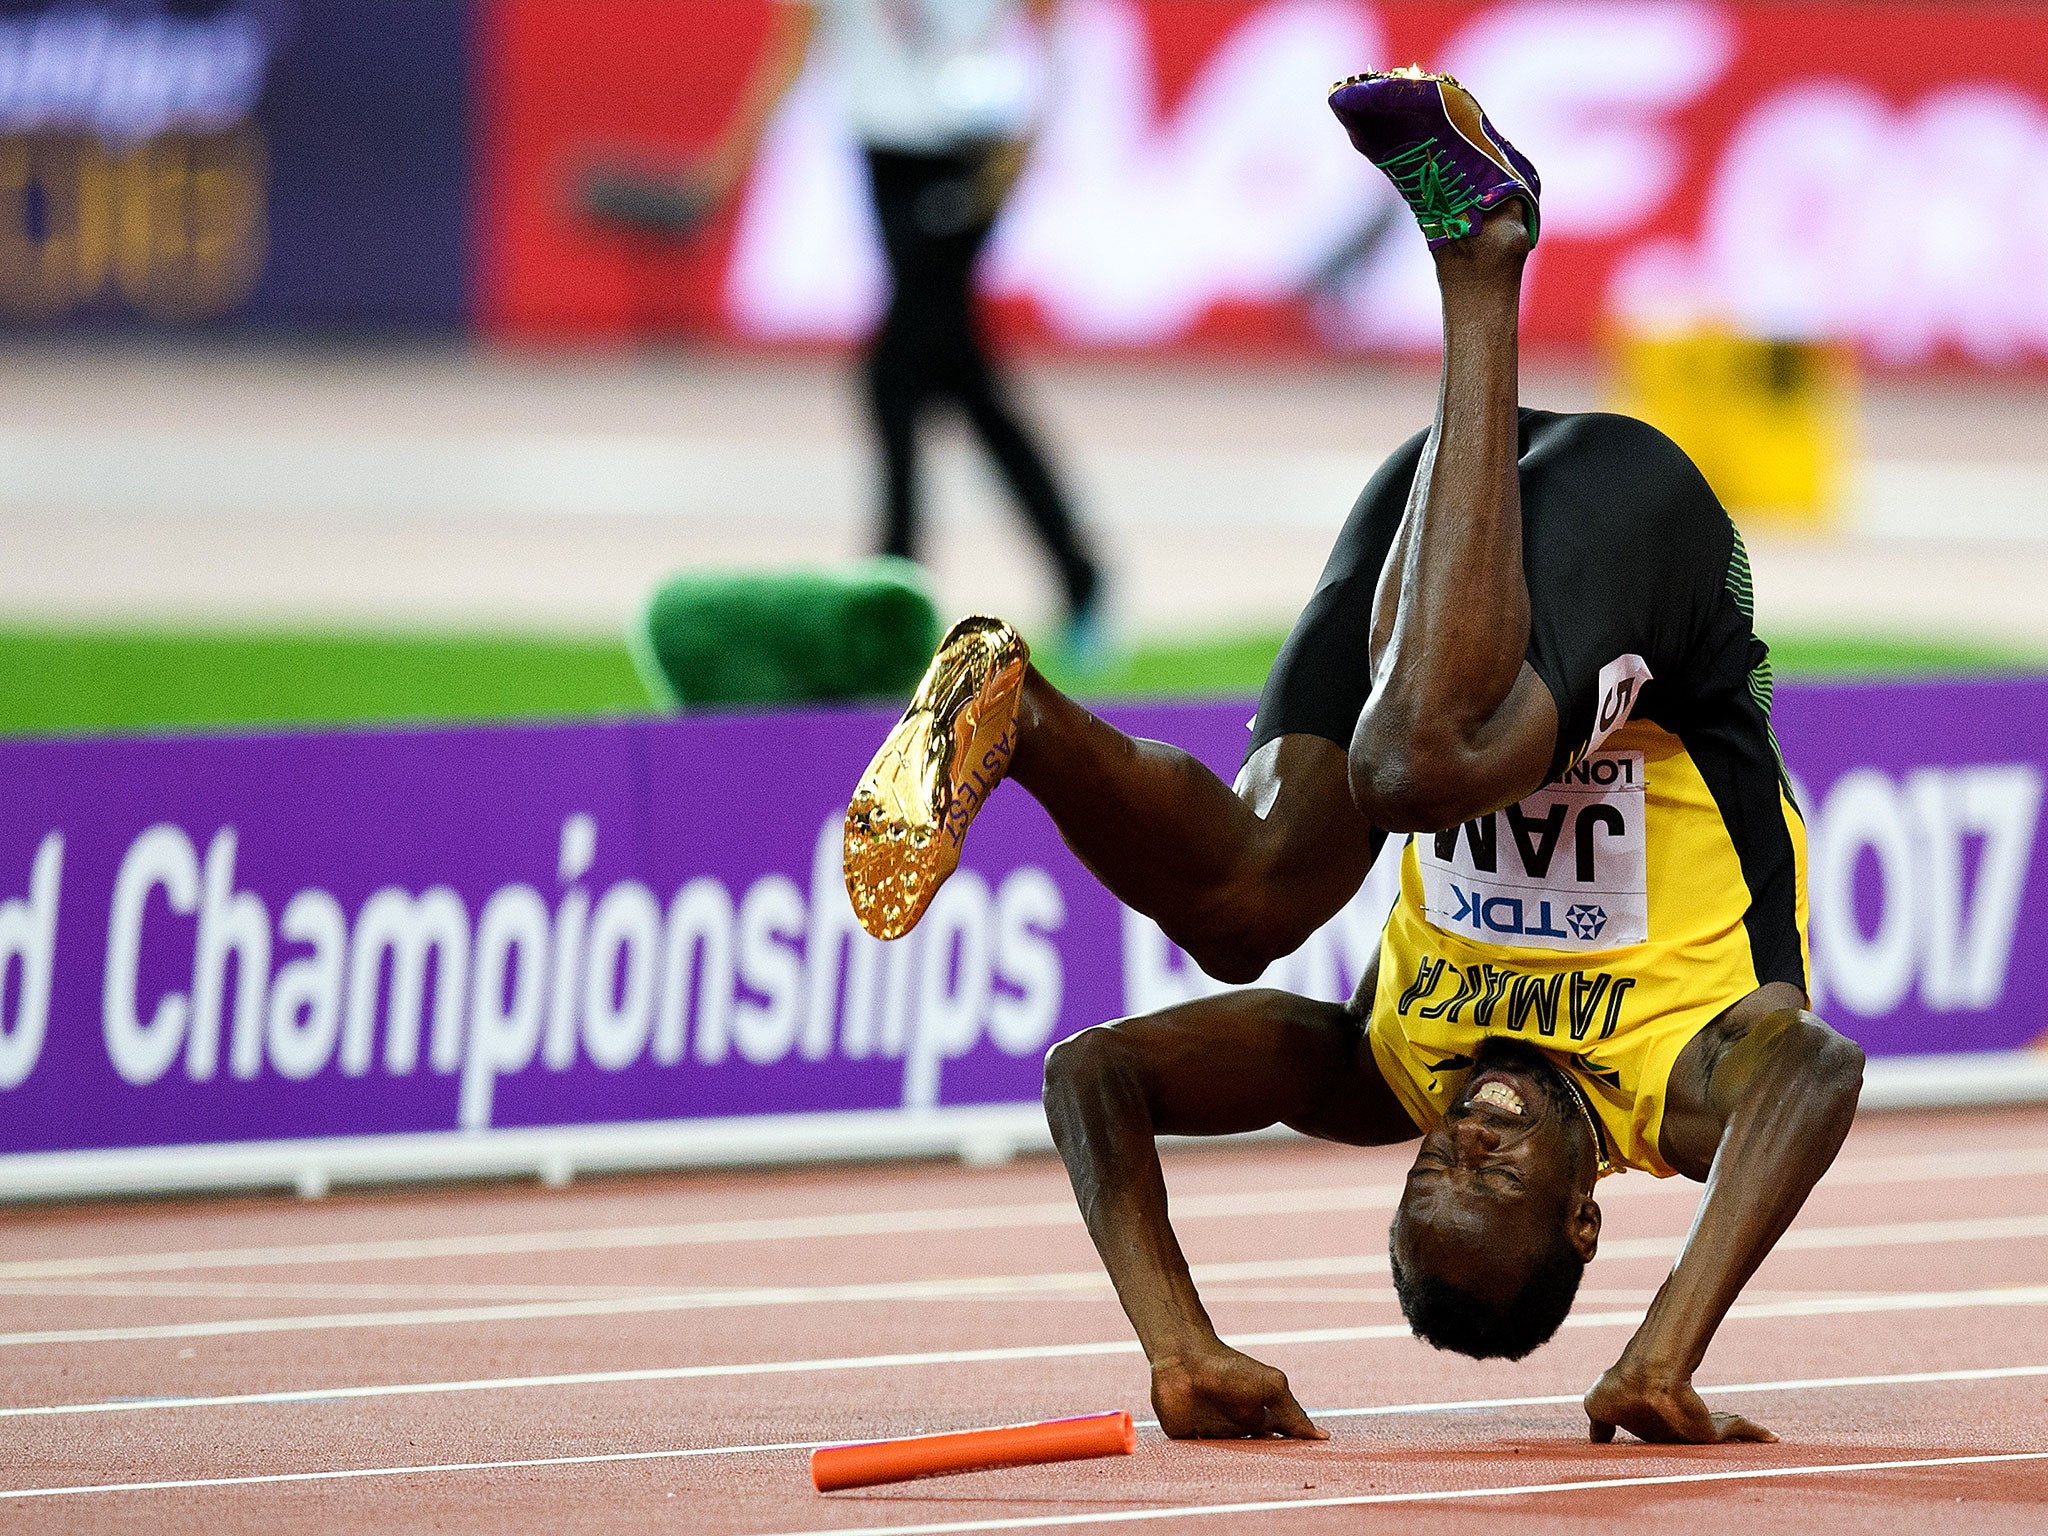 Bolt was struck down while running the final leg for Jamaica